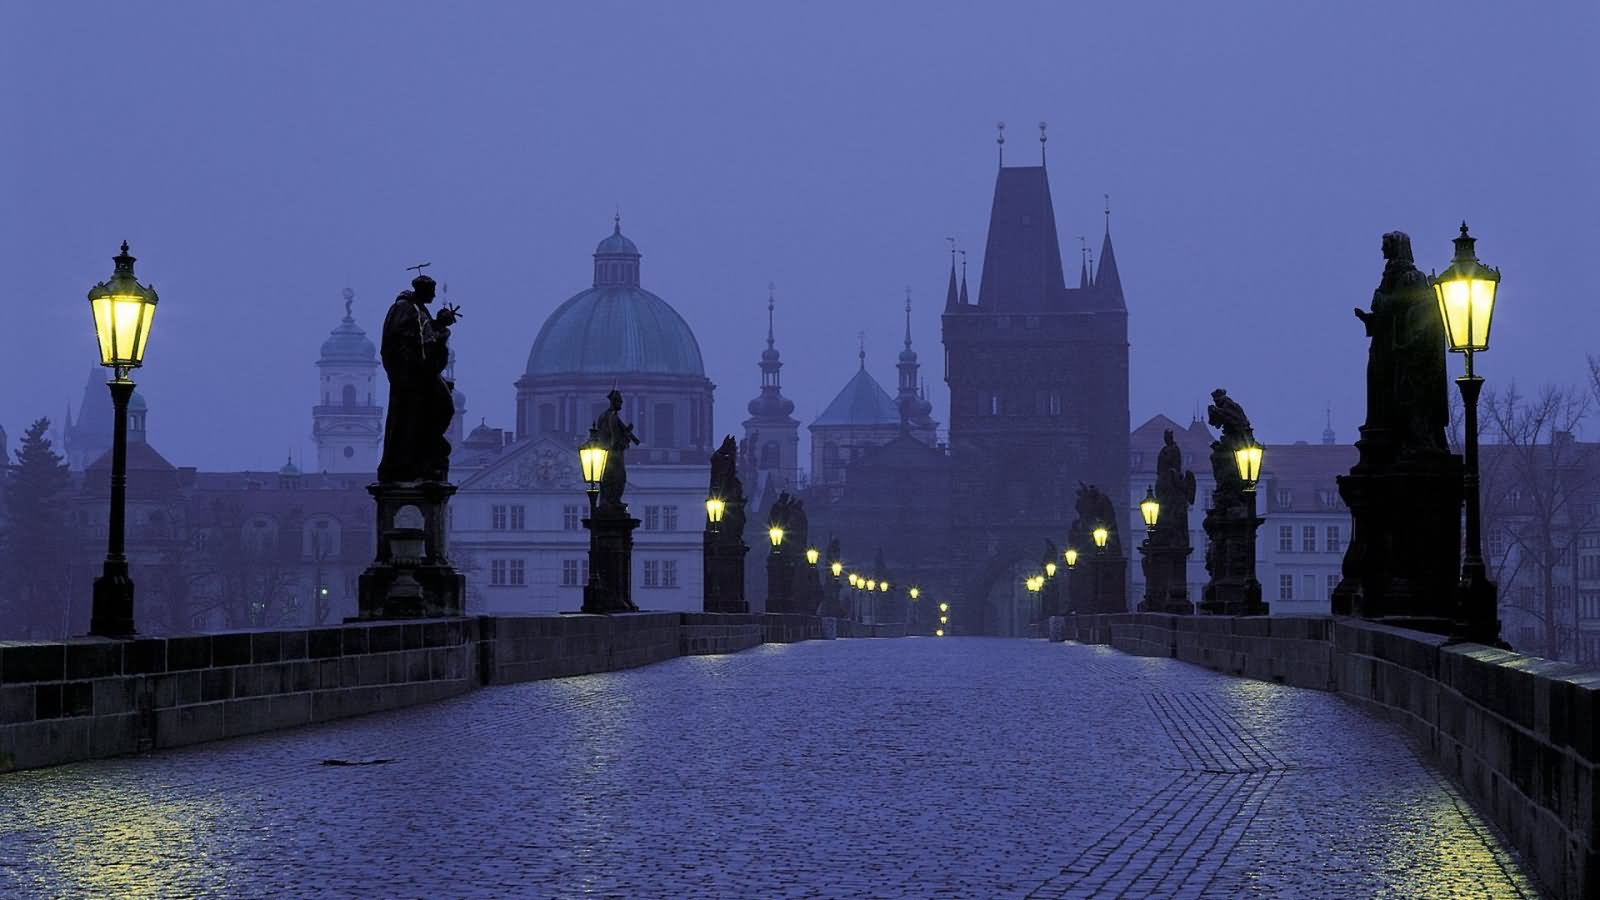 Night Picture Of The Charles Bridge